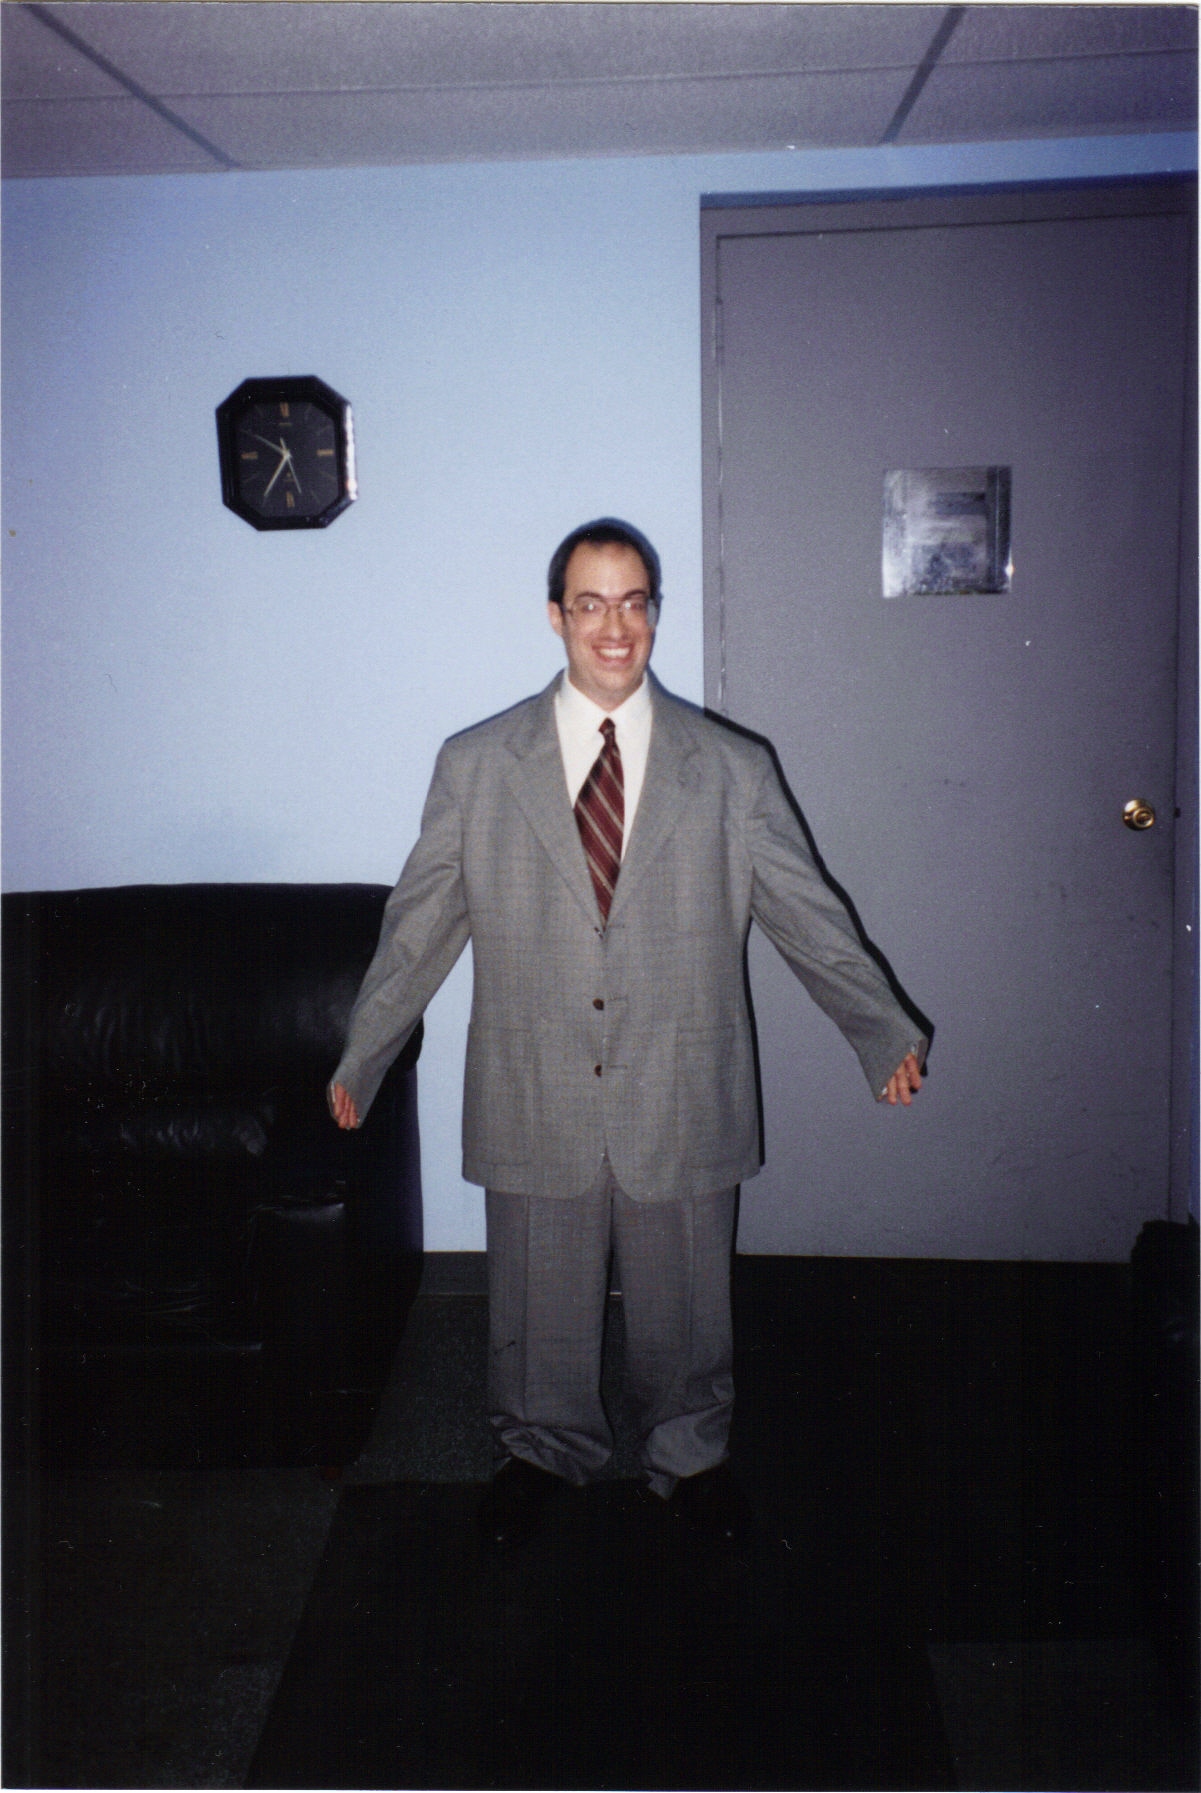 Jeff as a Short Guy in a Big Suit.